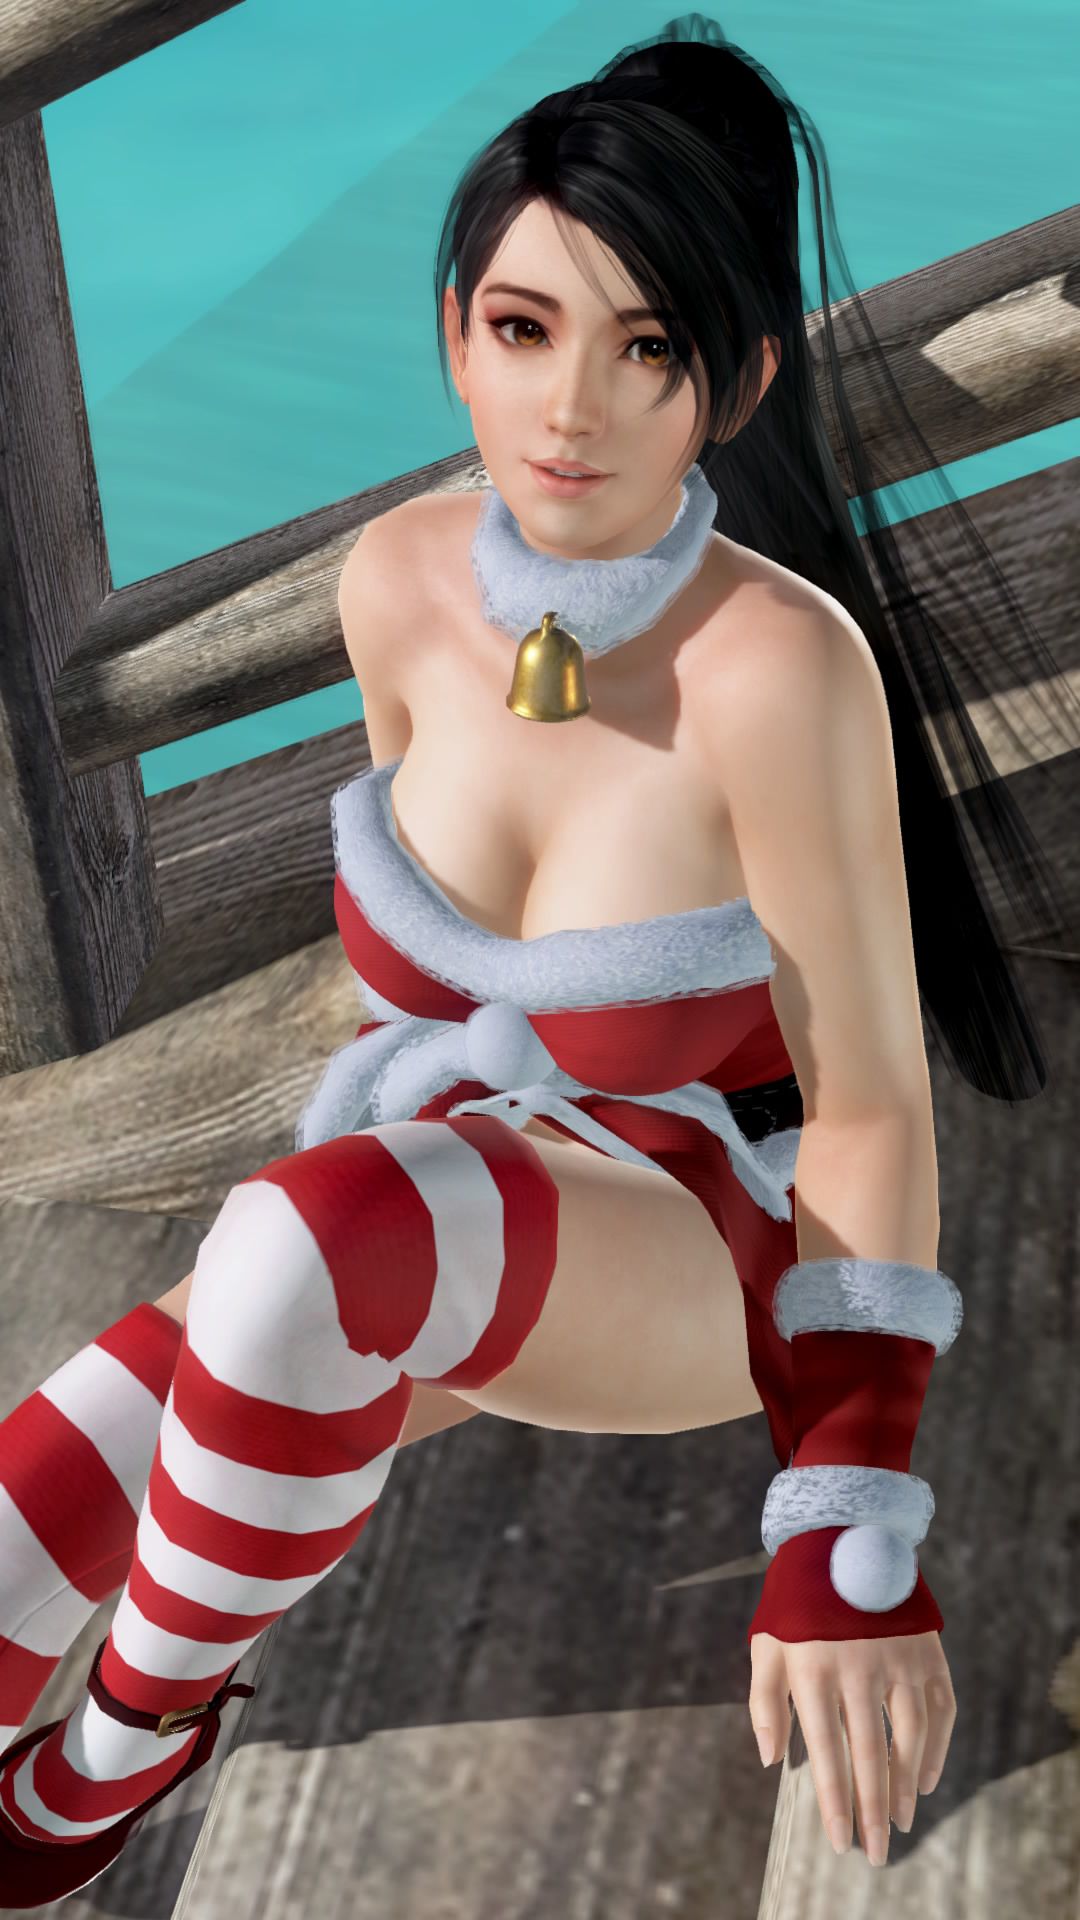 Merry Xmas from DOAX3 South Island! Photo session with new swimsuit Santa 7